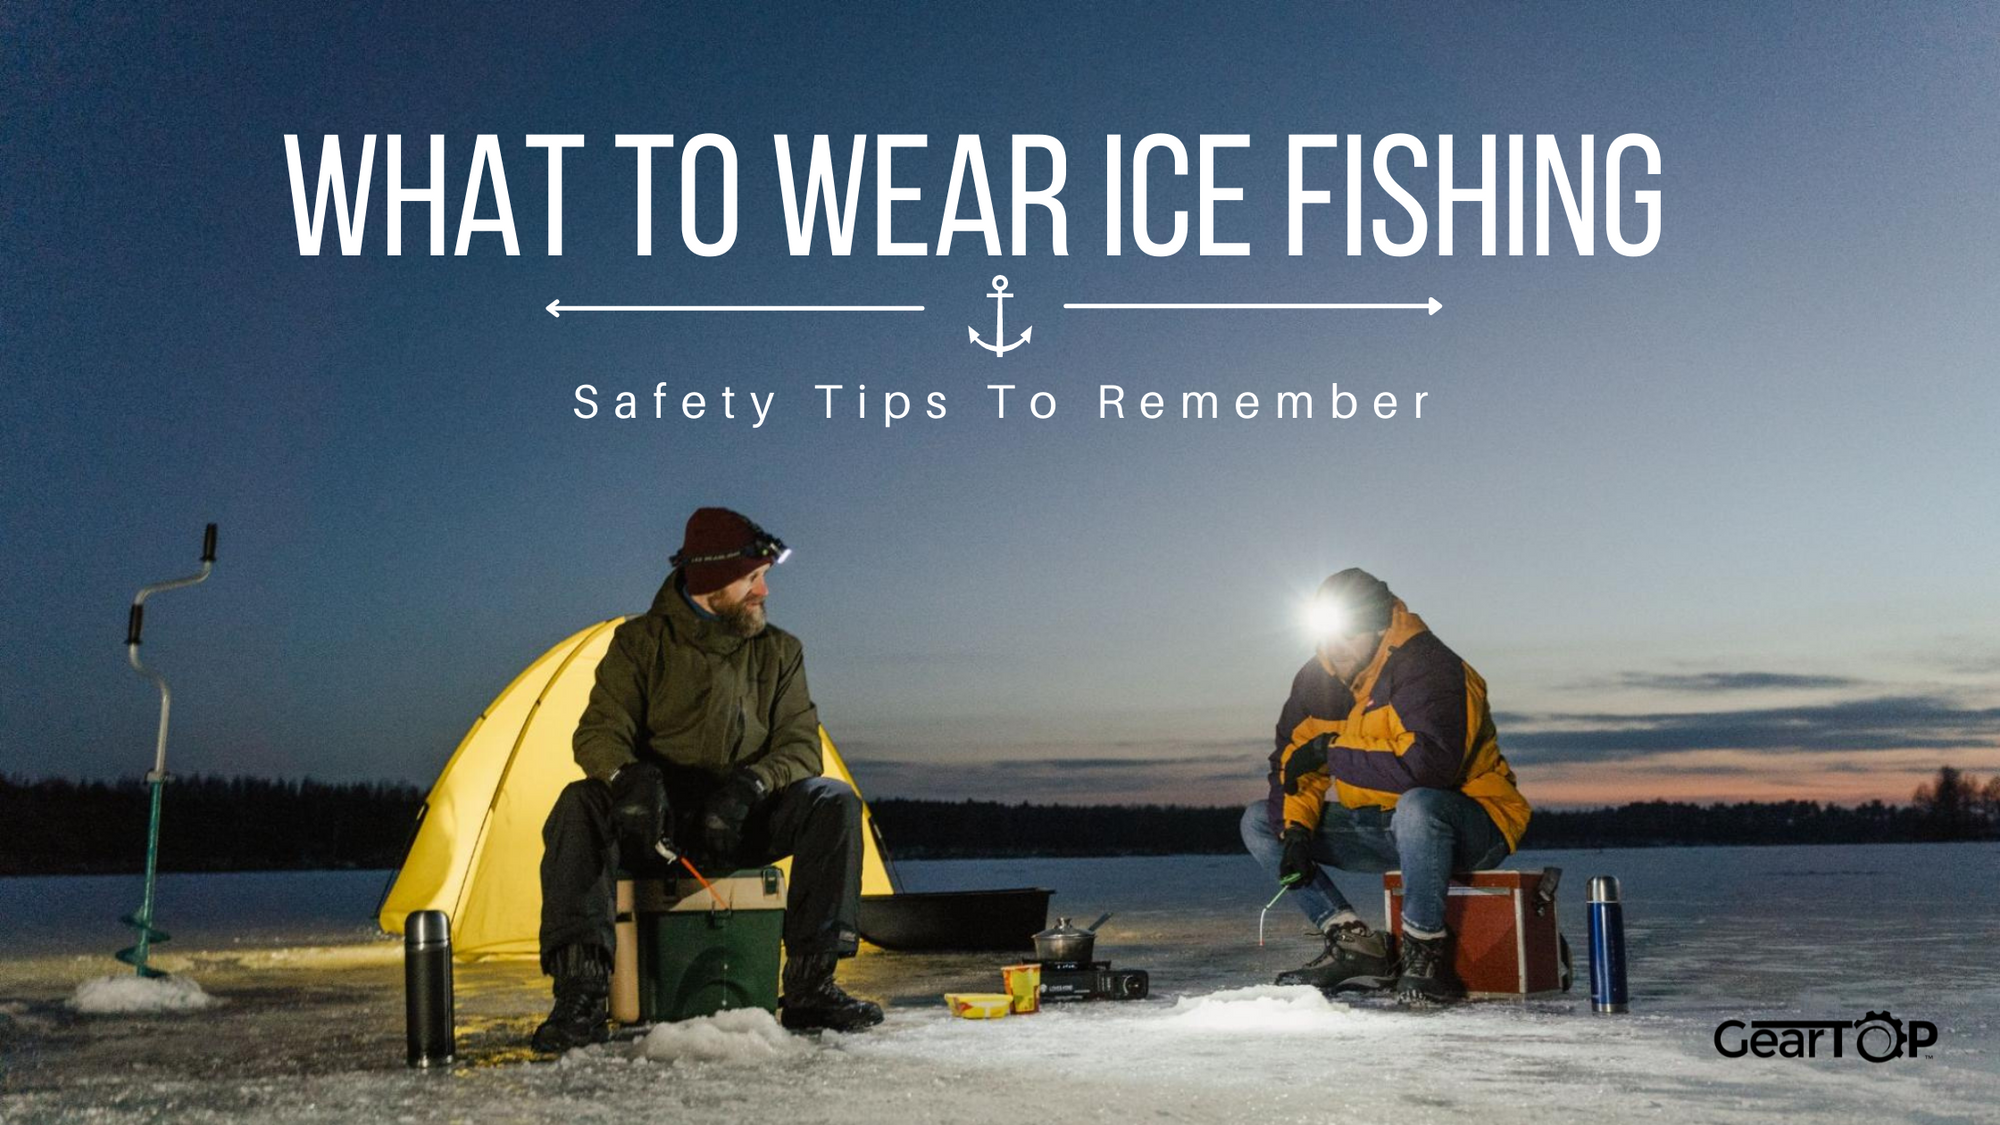 Ice fishing clothing and ice fishing gear